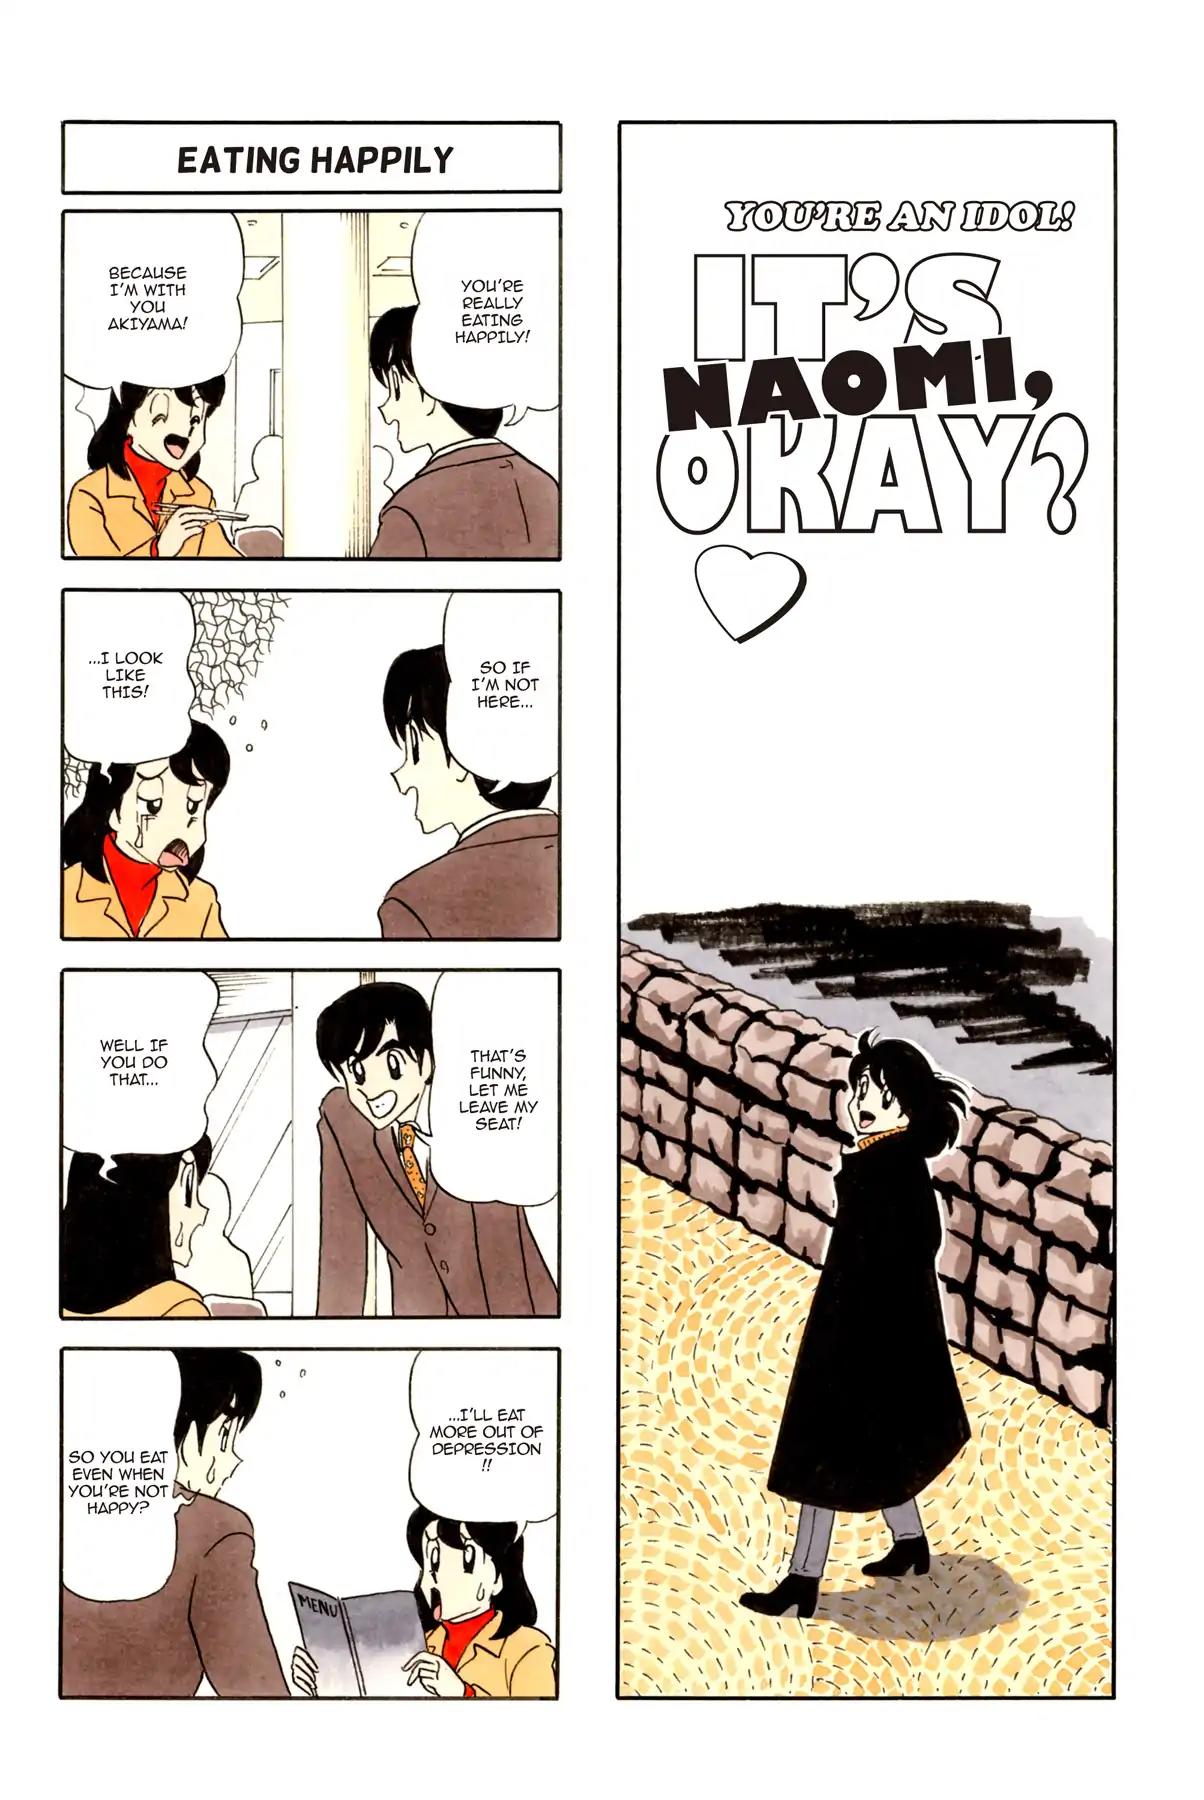 It's Naomi, Okay? After 16 Vol 1 Chapter 24